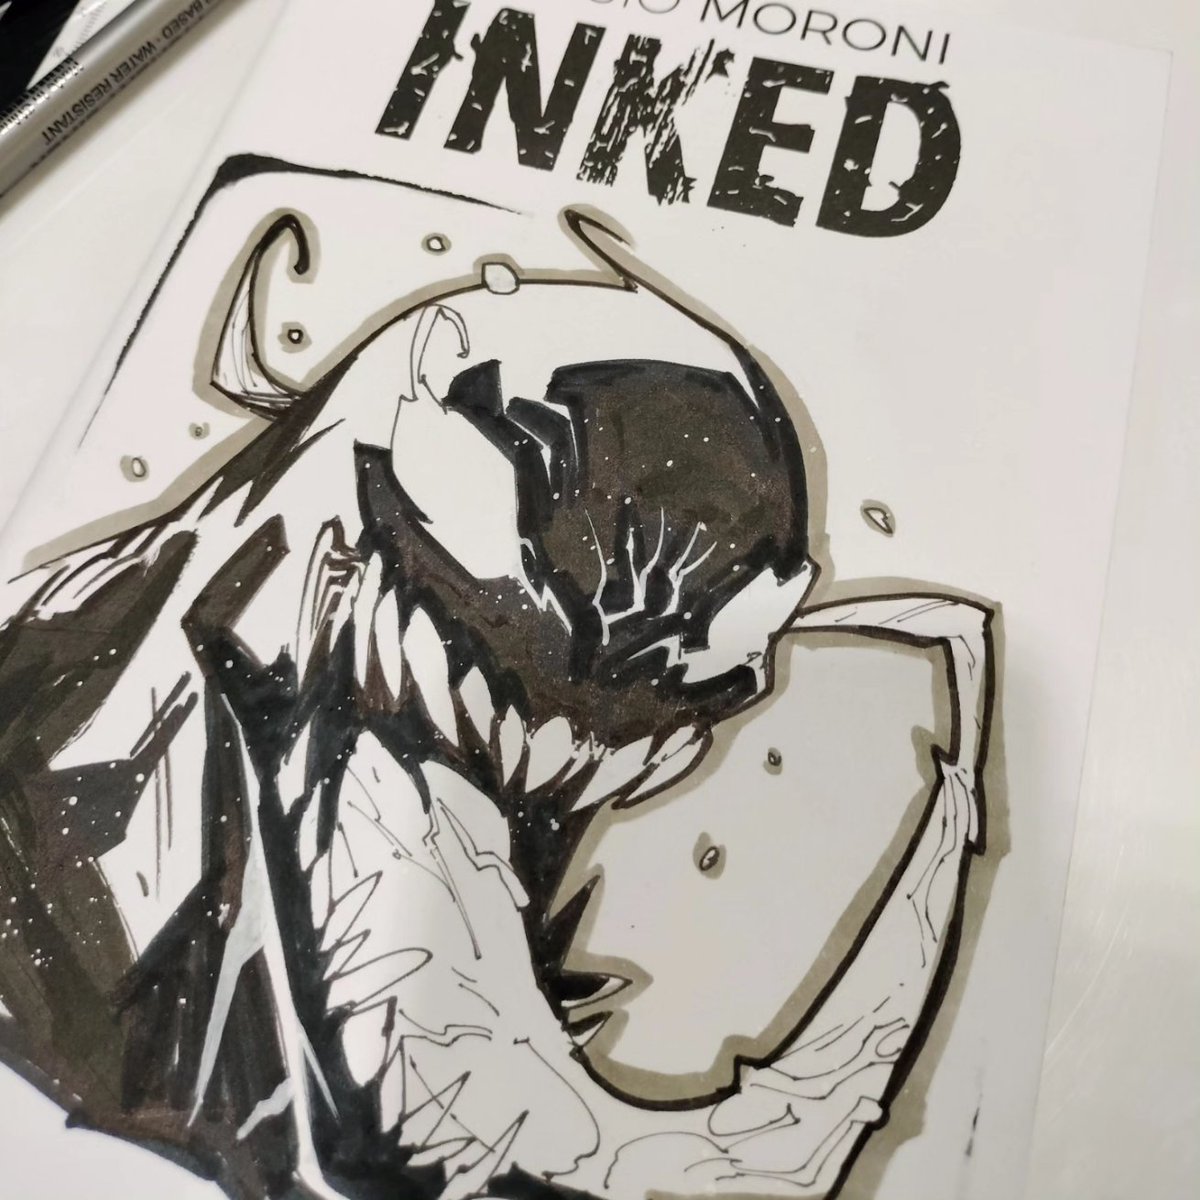 #Venom sketch done at Nerd Show Bologna, thanks to everybody, can't wait to see you at my next Con! #wearevenom #MarvelComics #SpiderMan #AcrossTheSpiderVerse #fanart #traditionalart #inked #alessiomoroni #comicartist